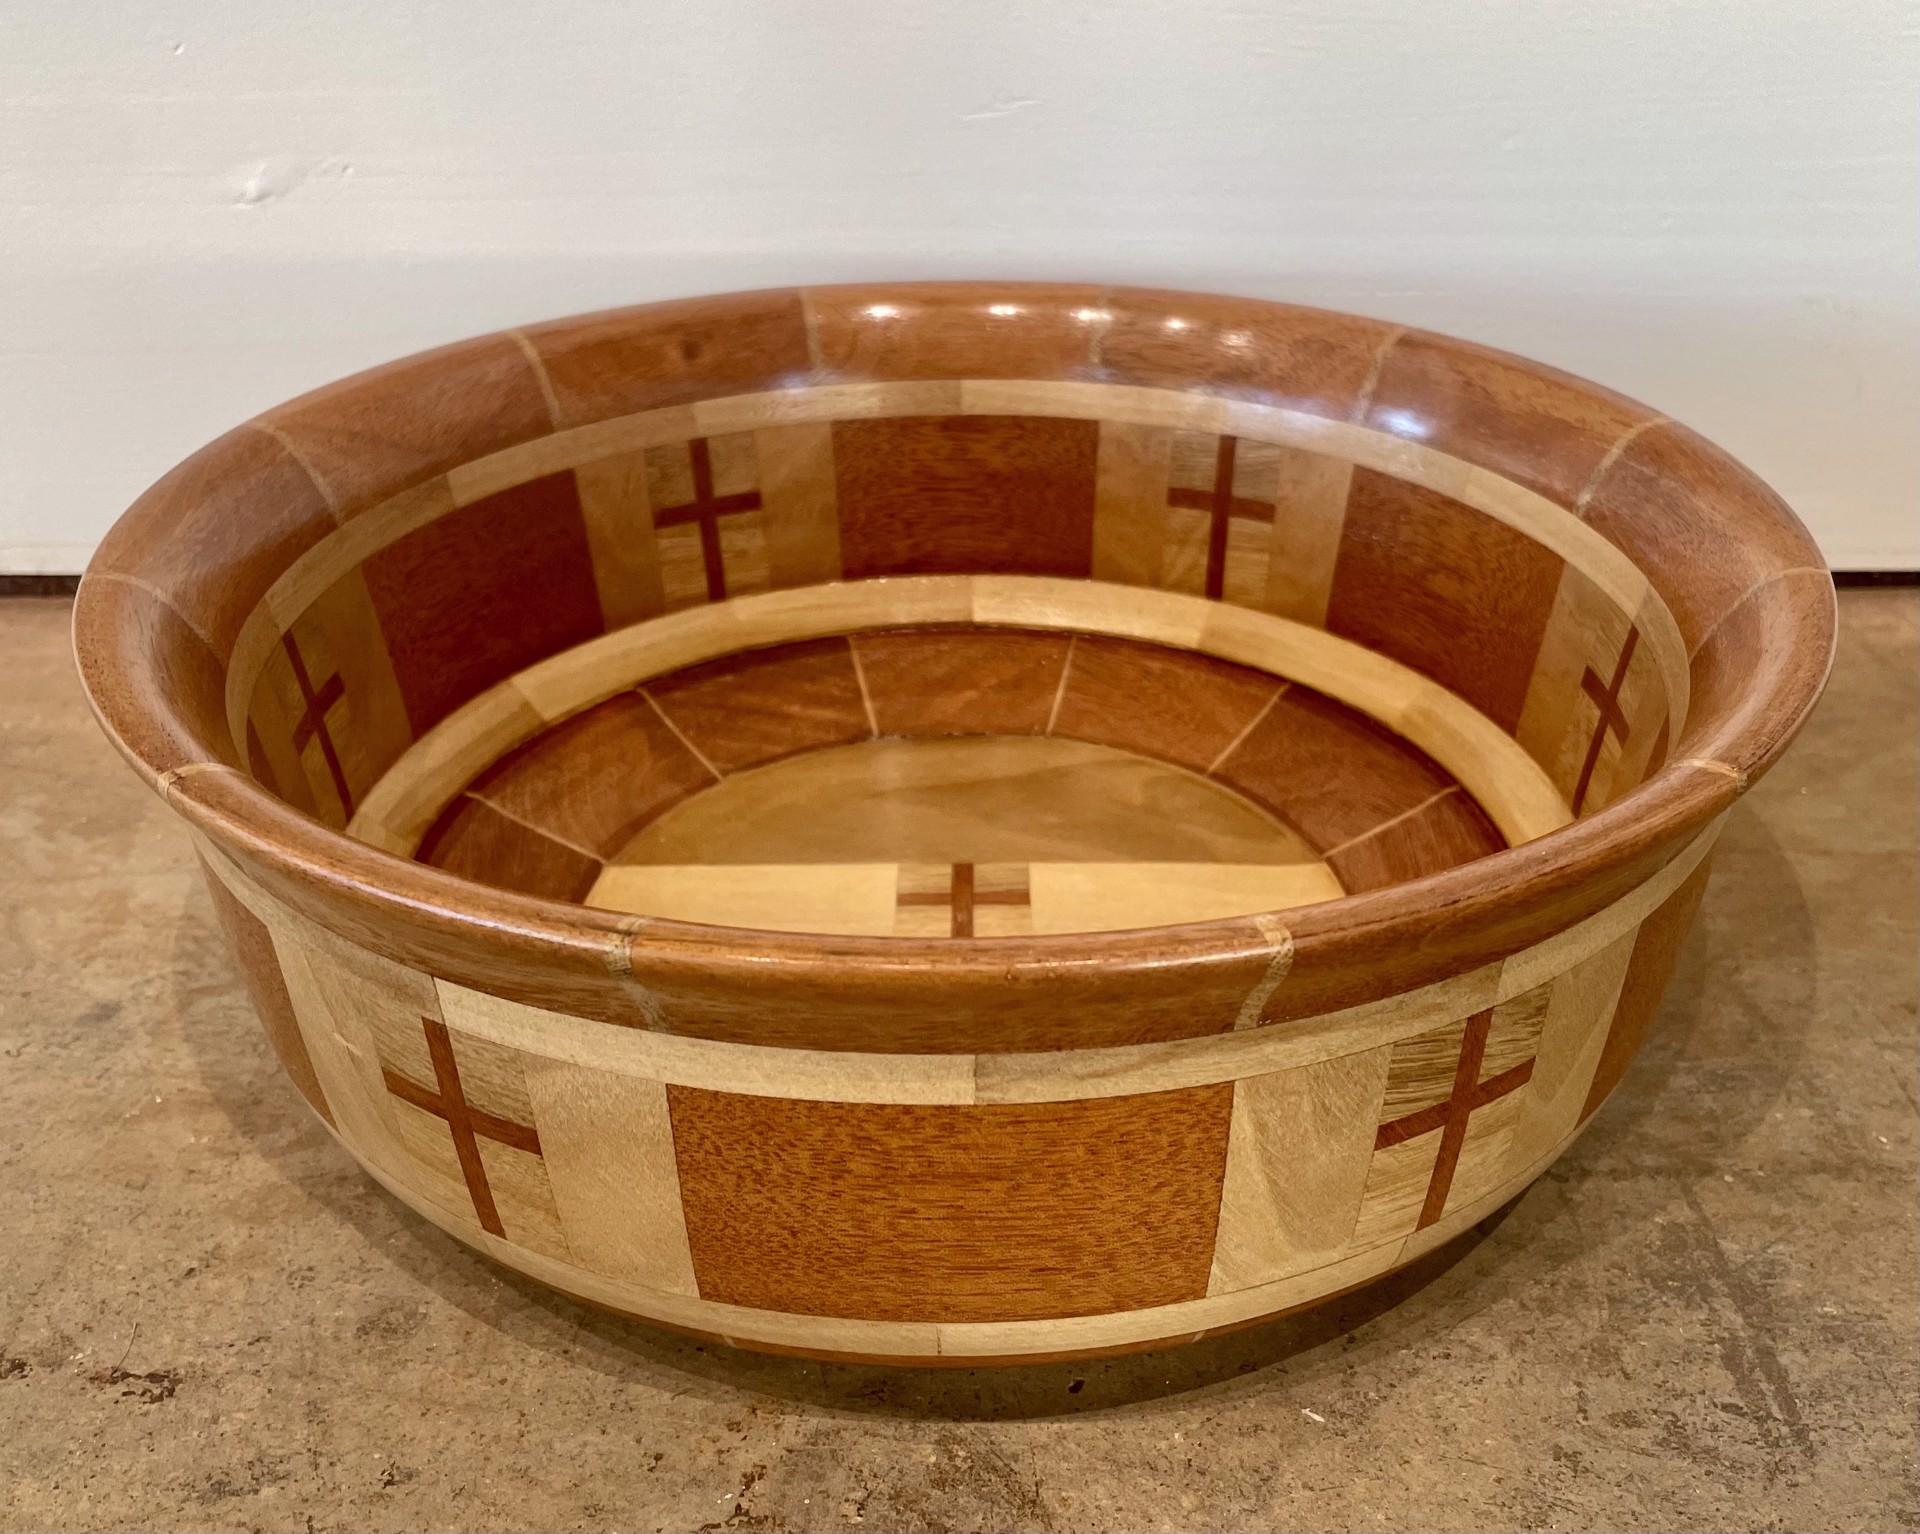 Hand Carved Bowl 4 by William Dunaway